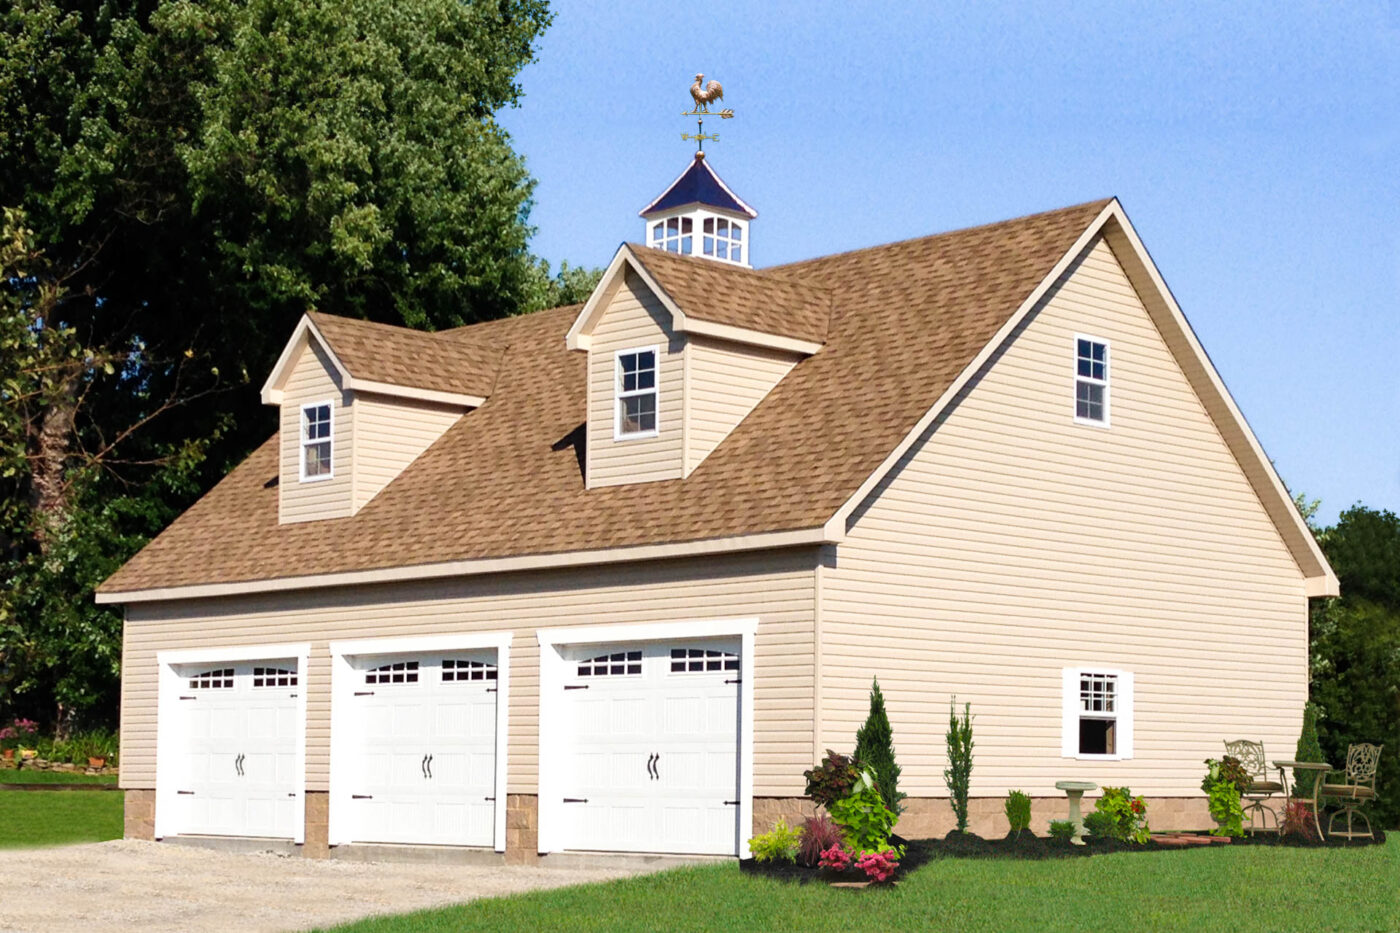 3 car garage for sale in NY 5